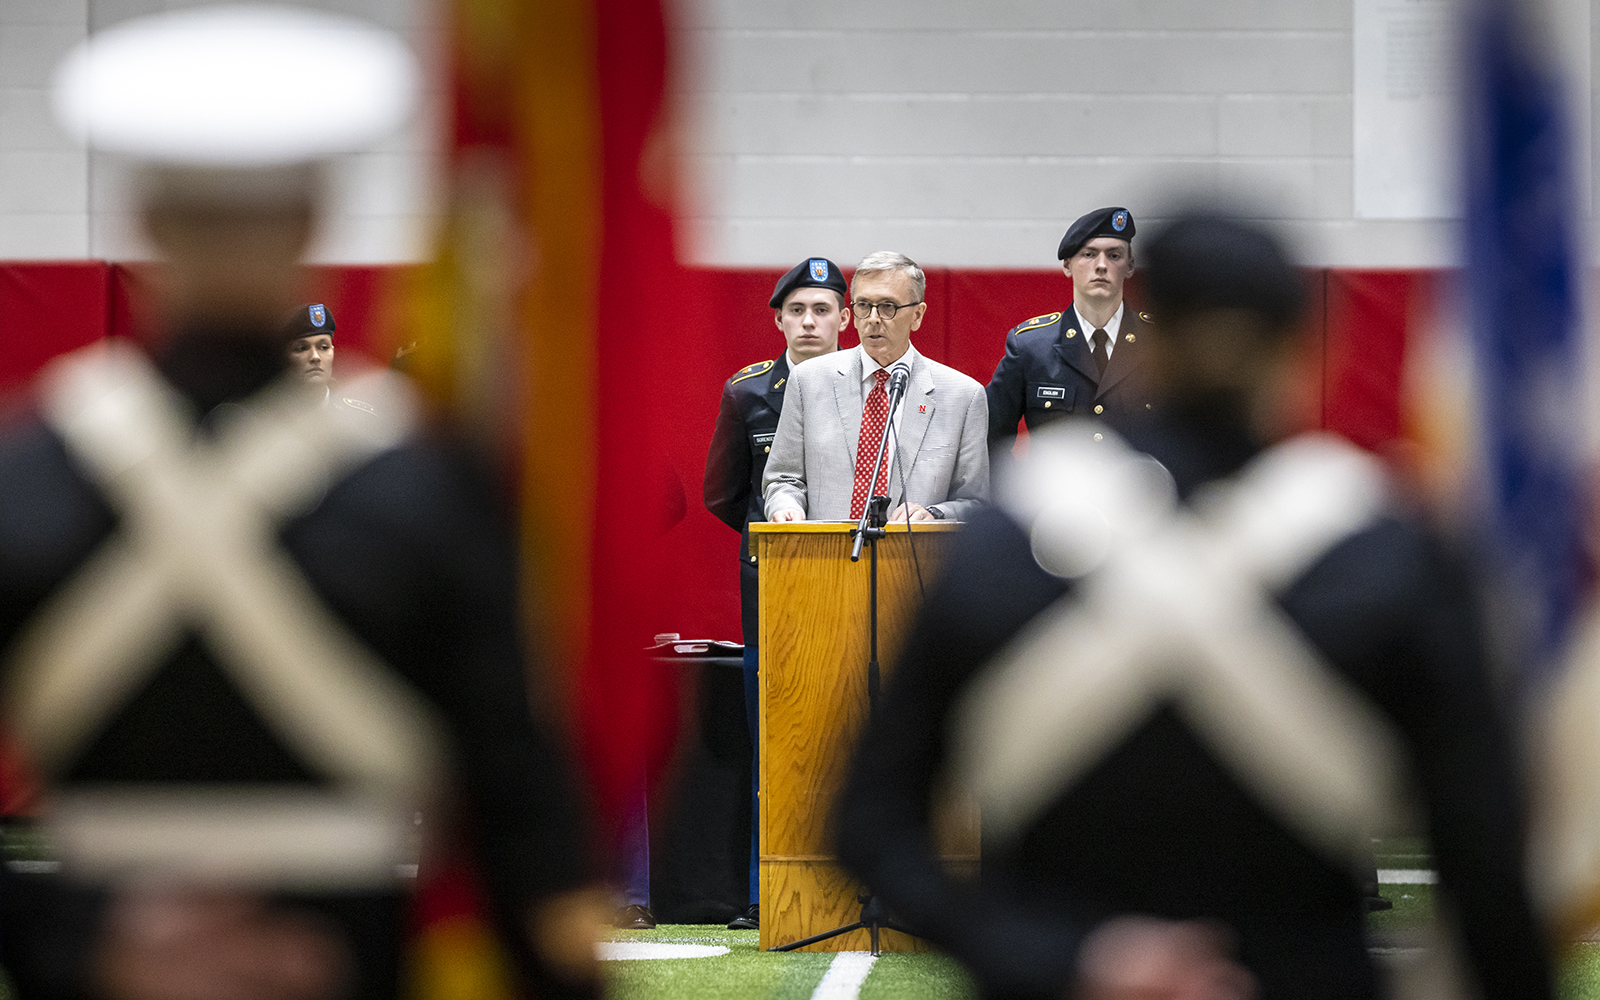 Chancellor holds annual review of ROTC cadets